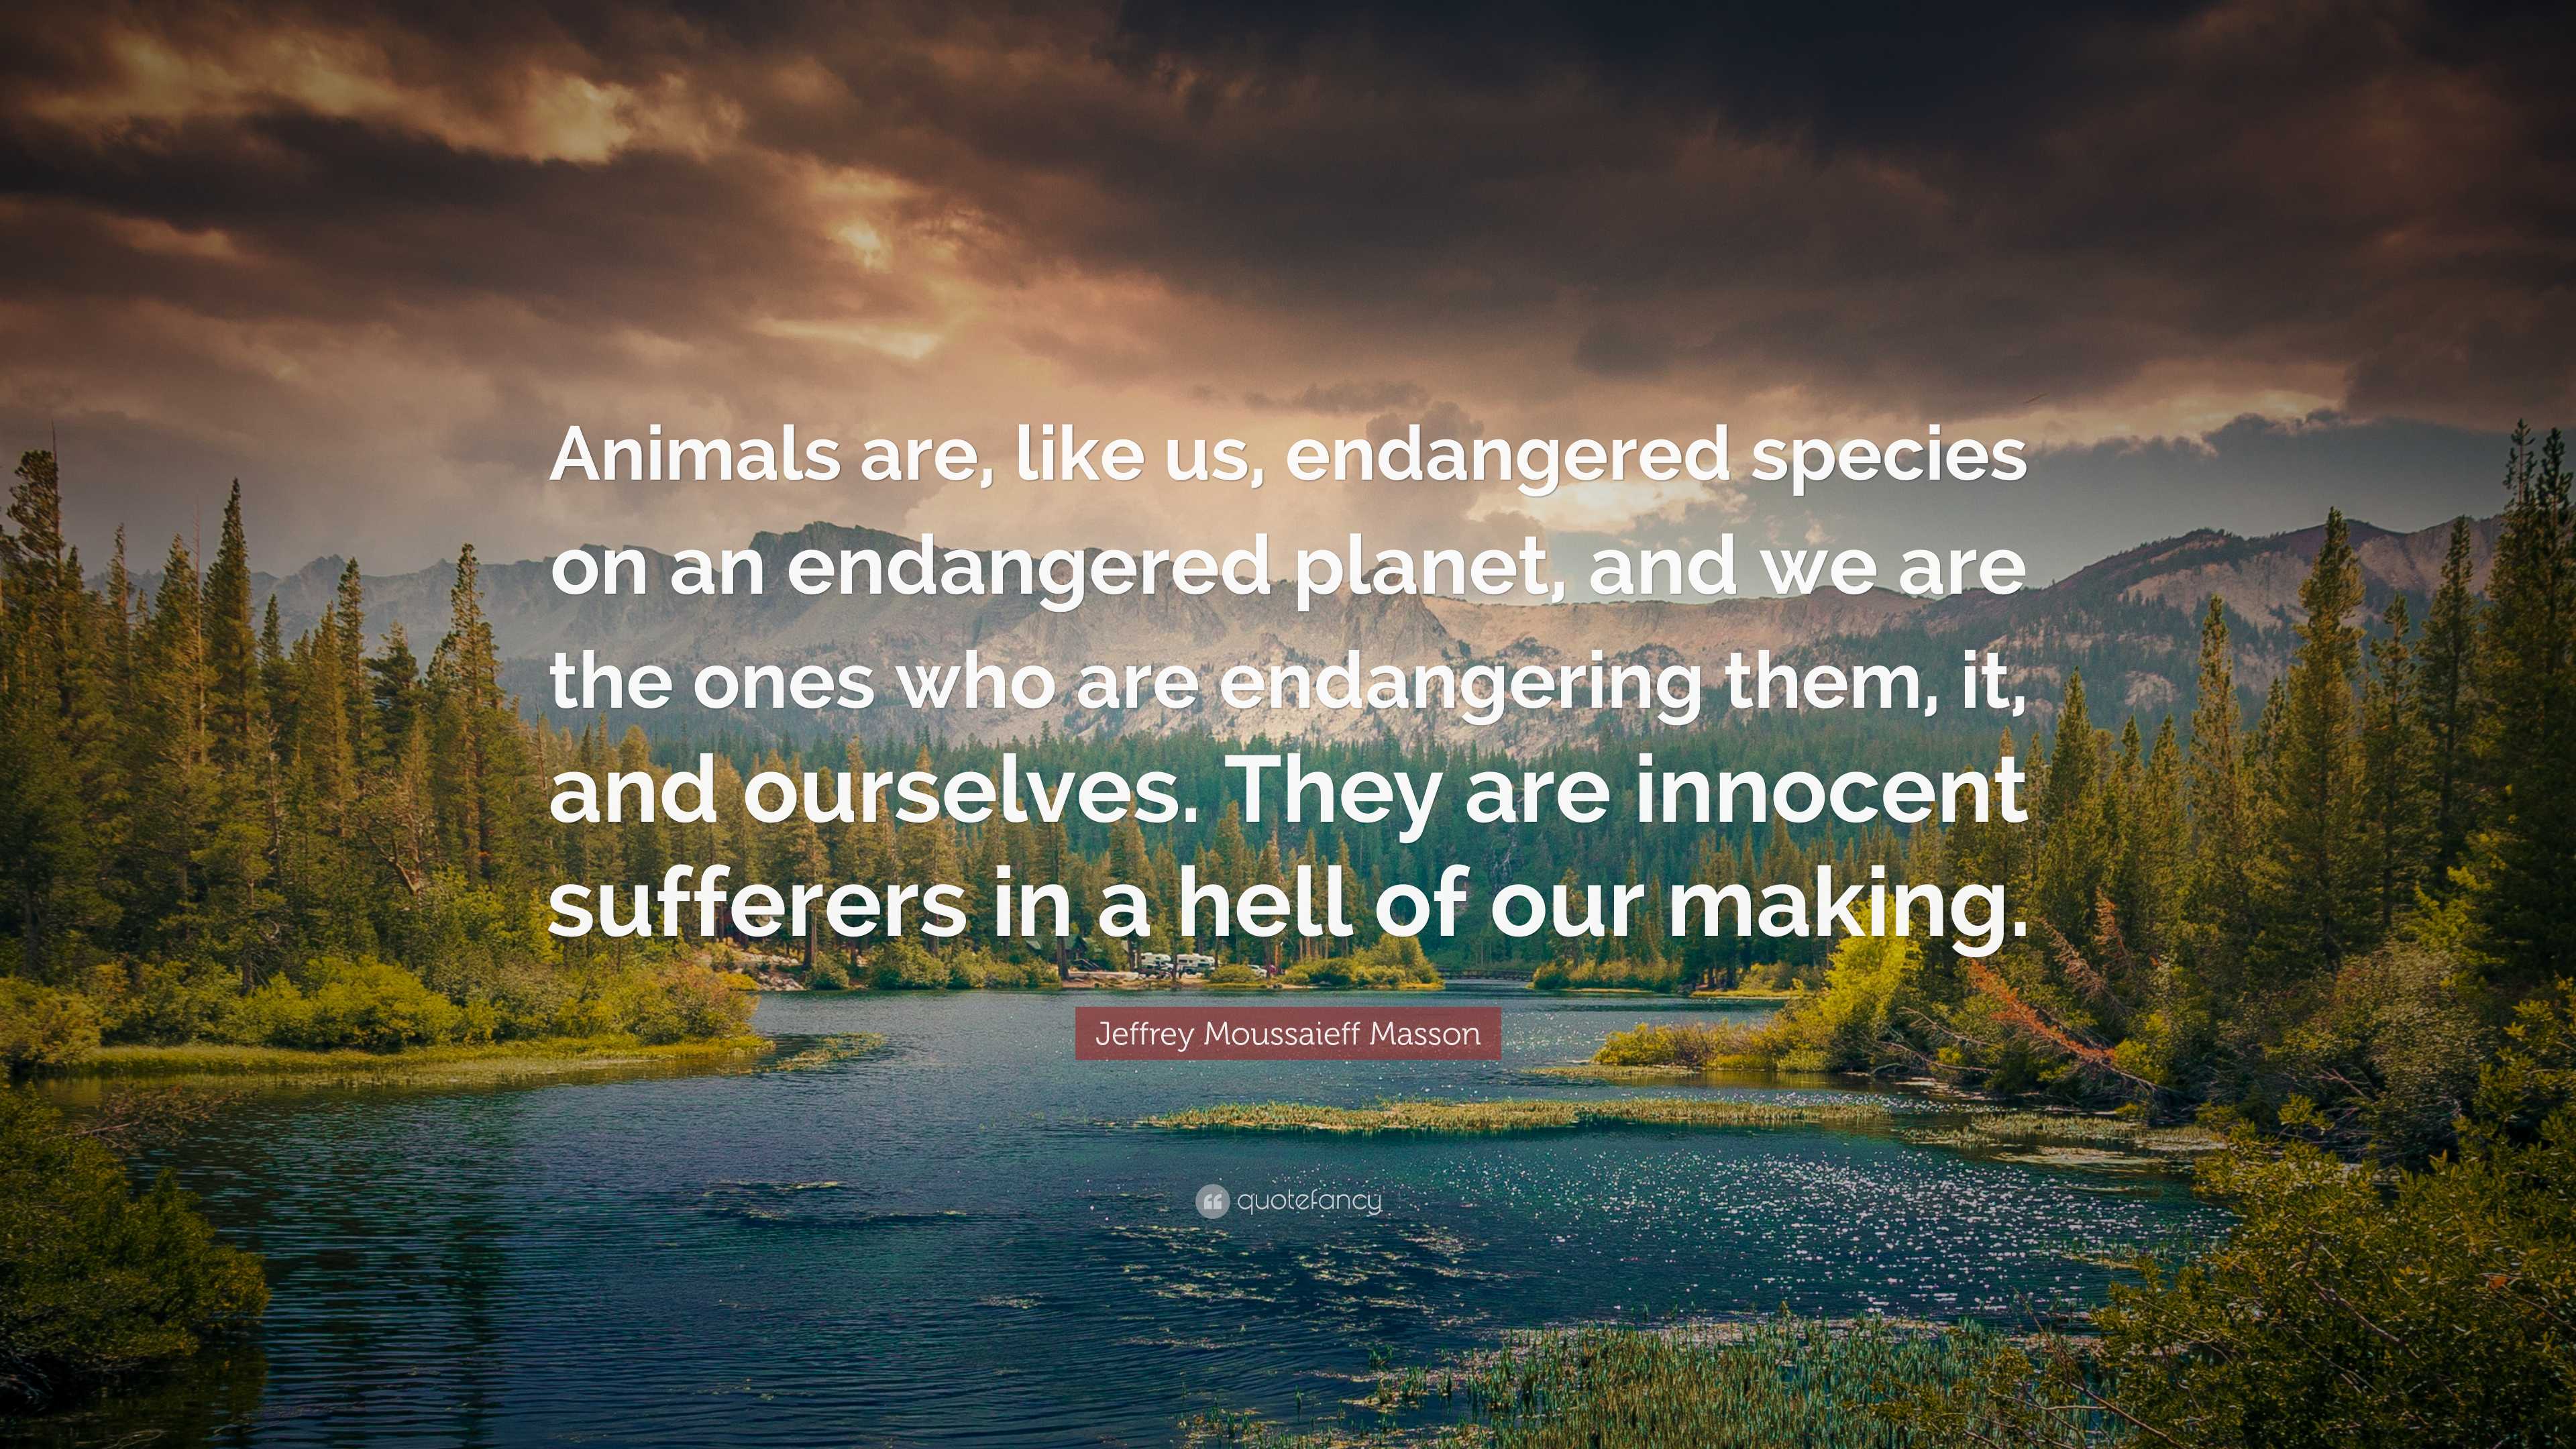 Jeffrey Moussaieff Masson Quote: “Animals are, like us, endangered ...